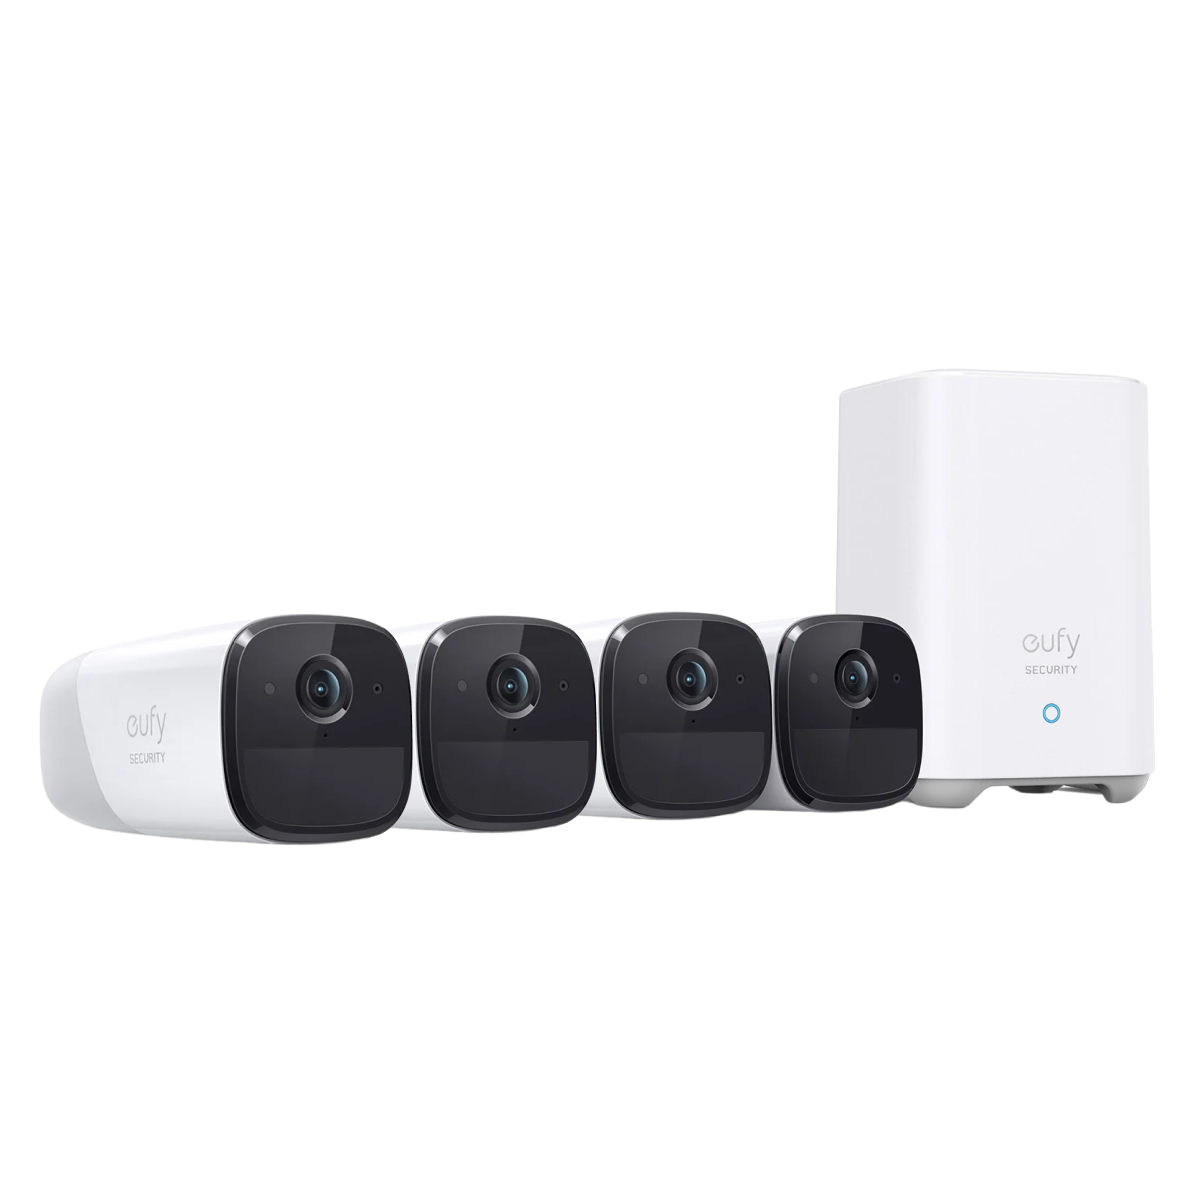 Eufy's wireless home security systems — including 'the doorbell to get!' —  are up to 60% off 'til midnight